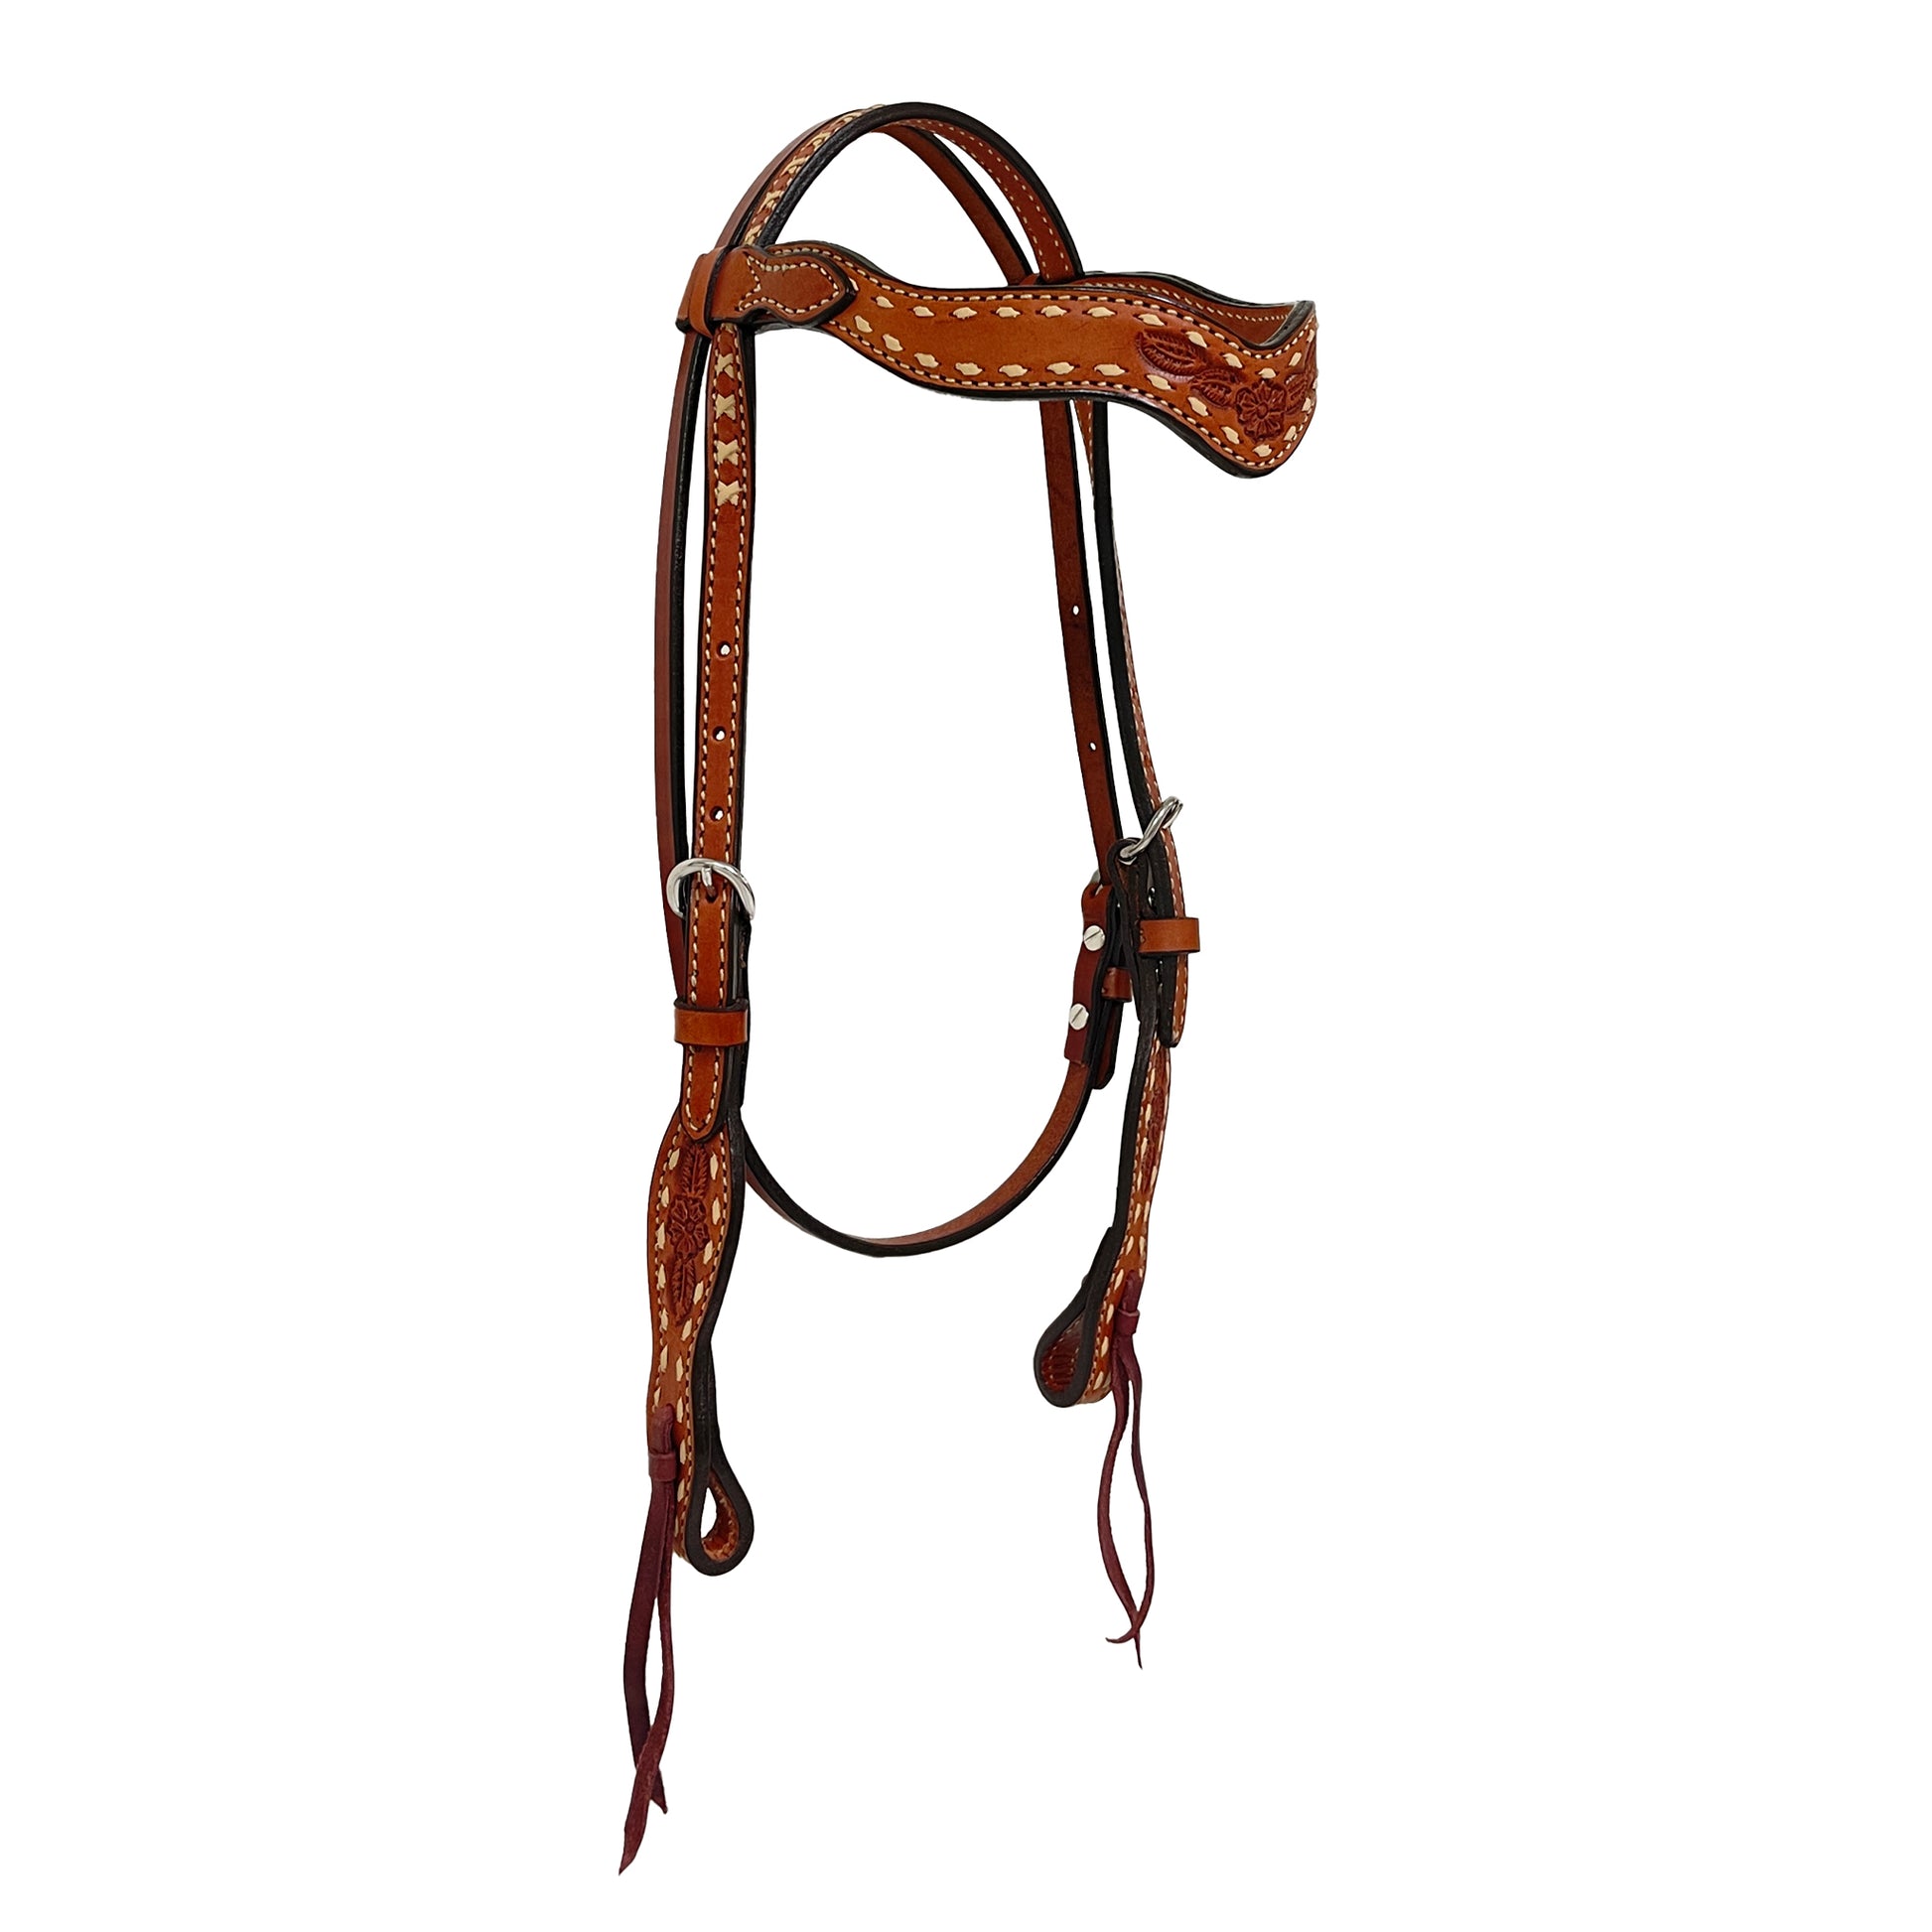 1-1/2" Wave browband headstall toast leather flower seed tooling and with cream buckstitch.